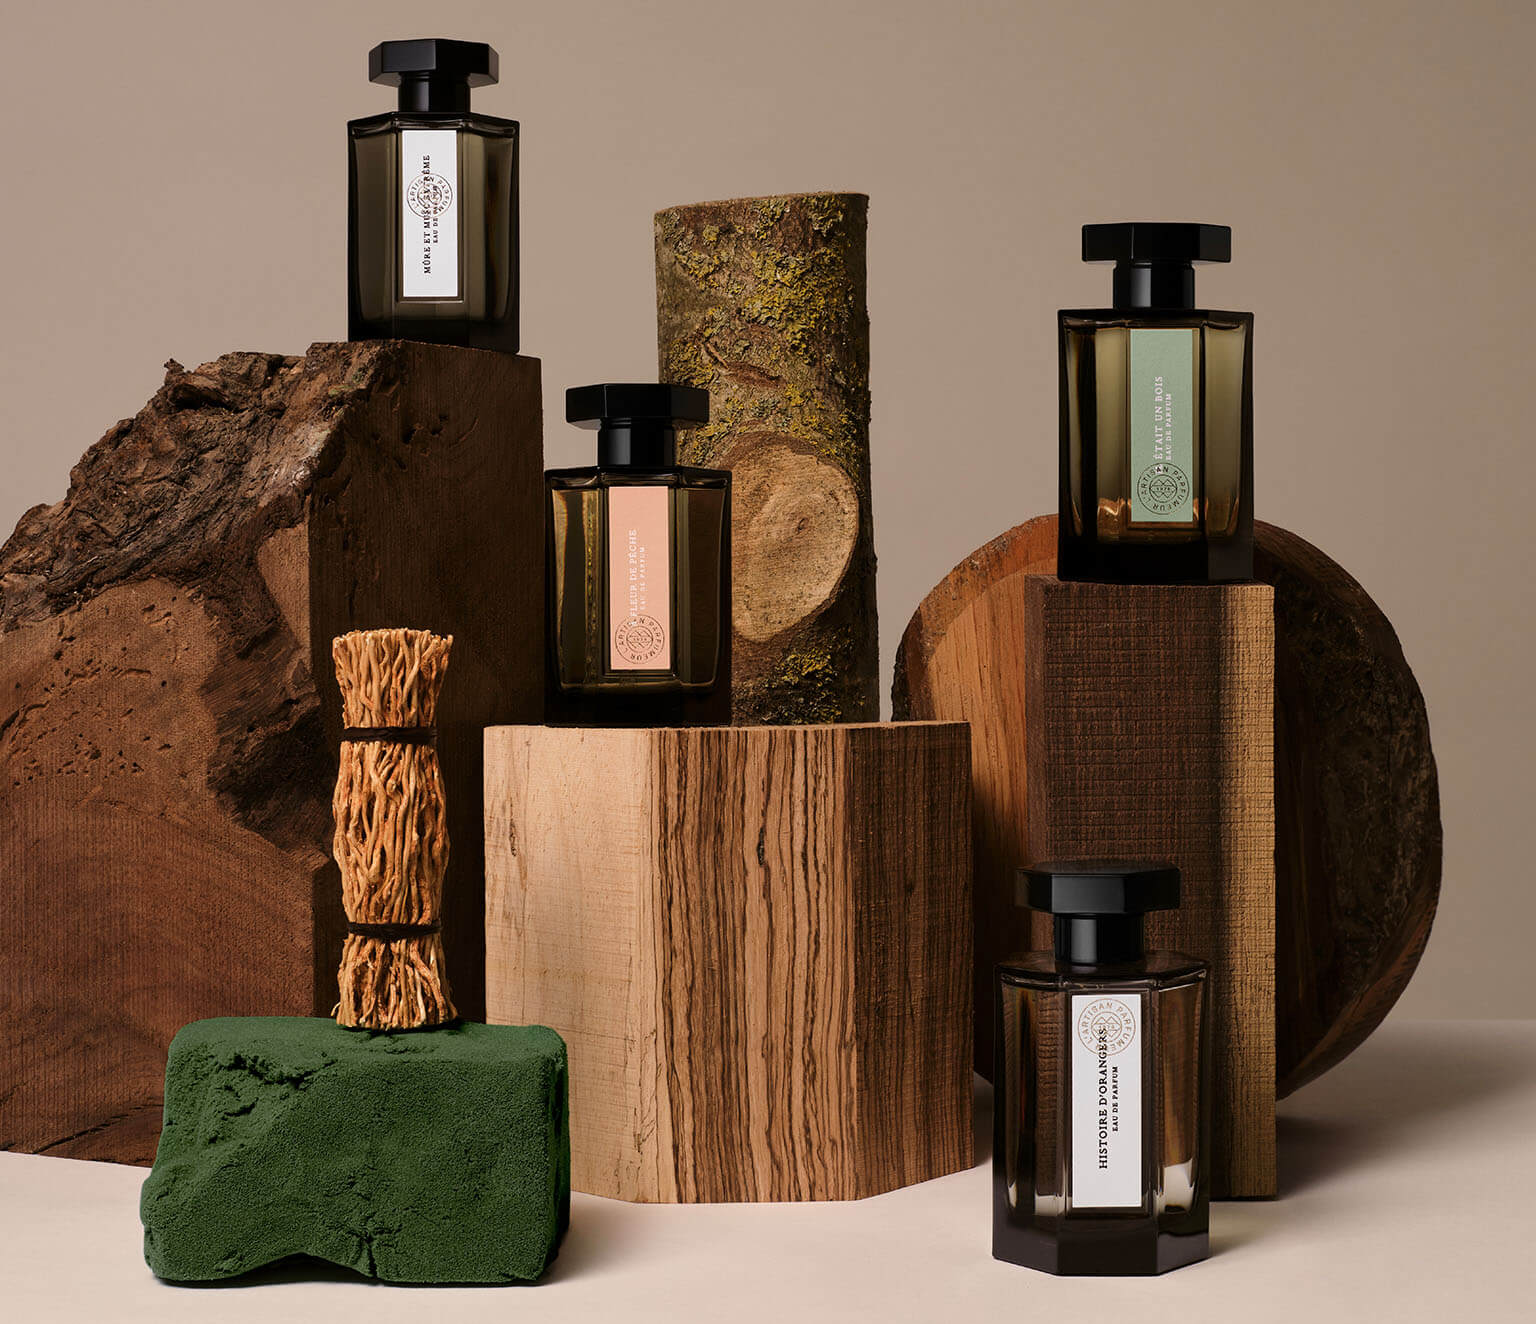 Crafted Artisanal Fragrances